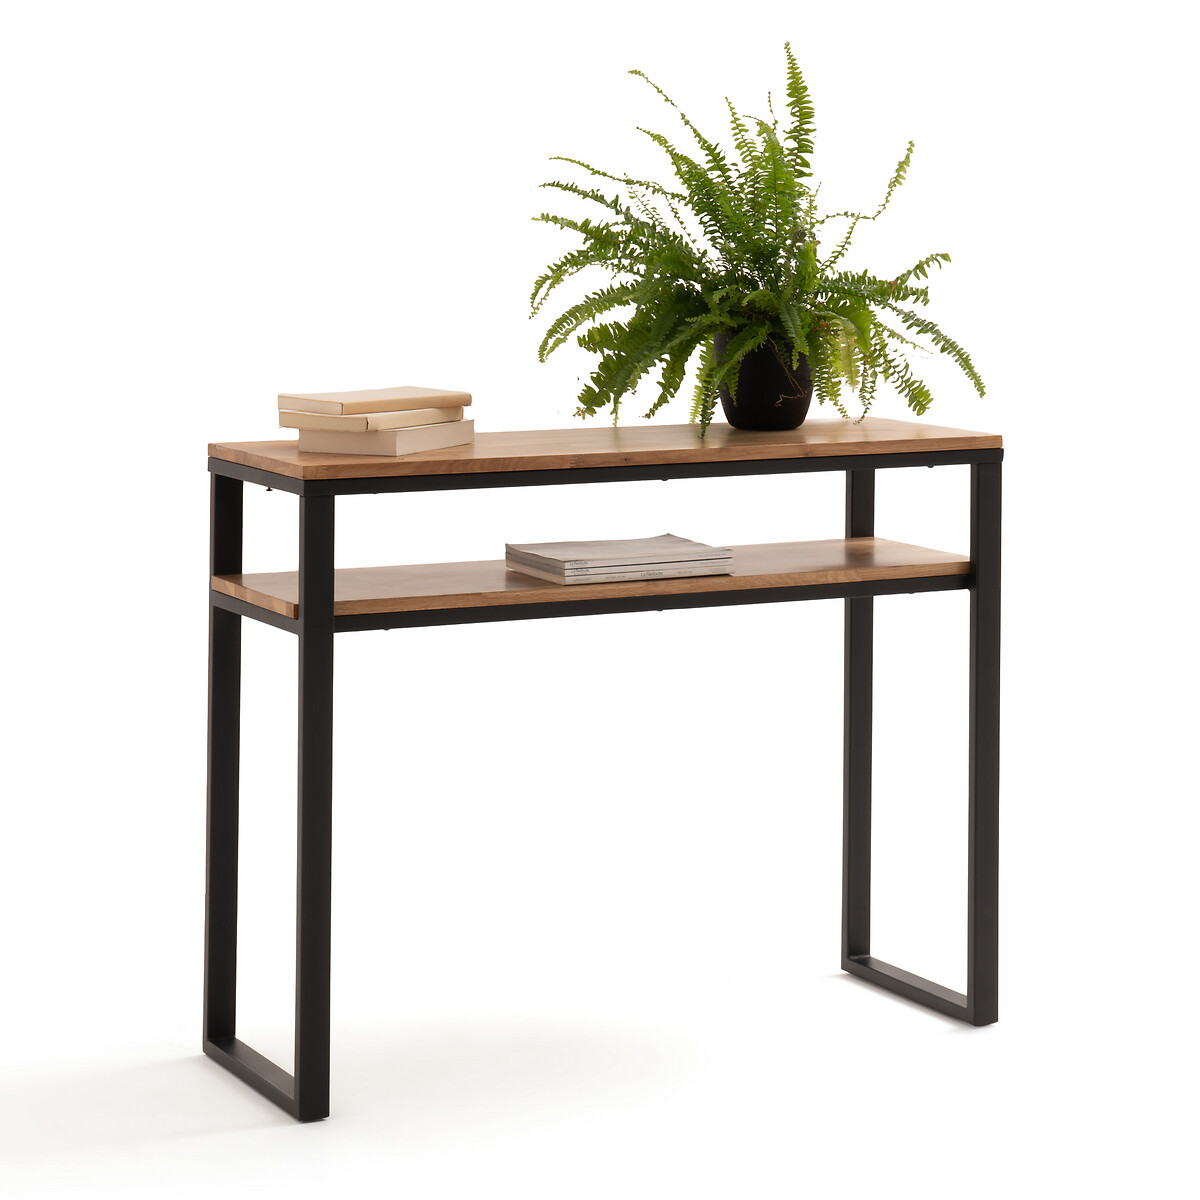 Hiba Solid Oak And Steel Console Table, Console Tables Less Than 100cm Wide